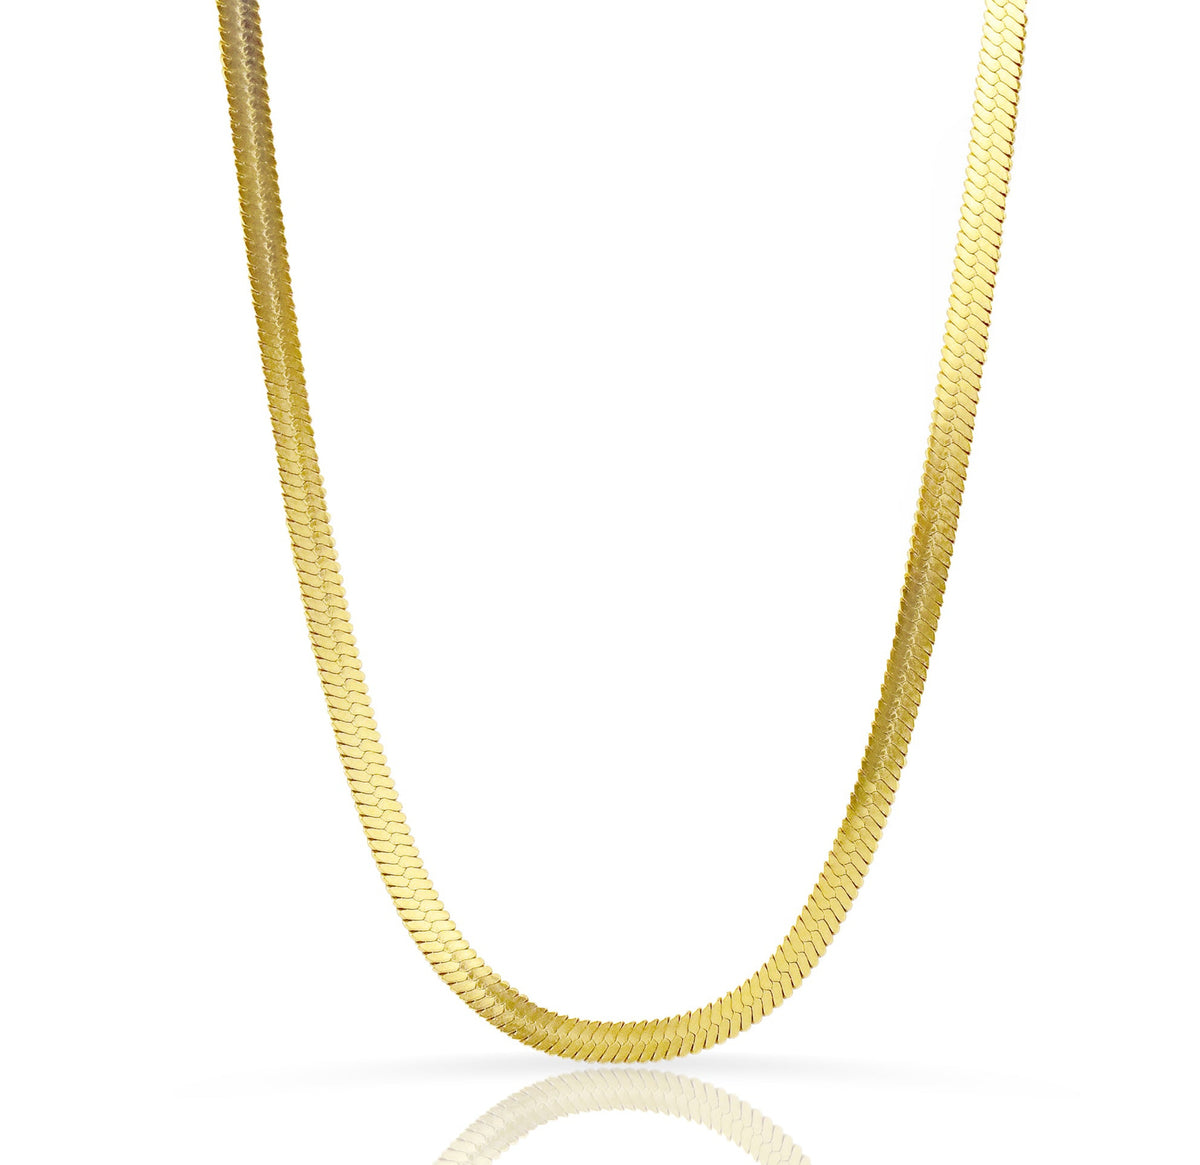 gold snake chain necklace waterproof jewelry